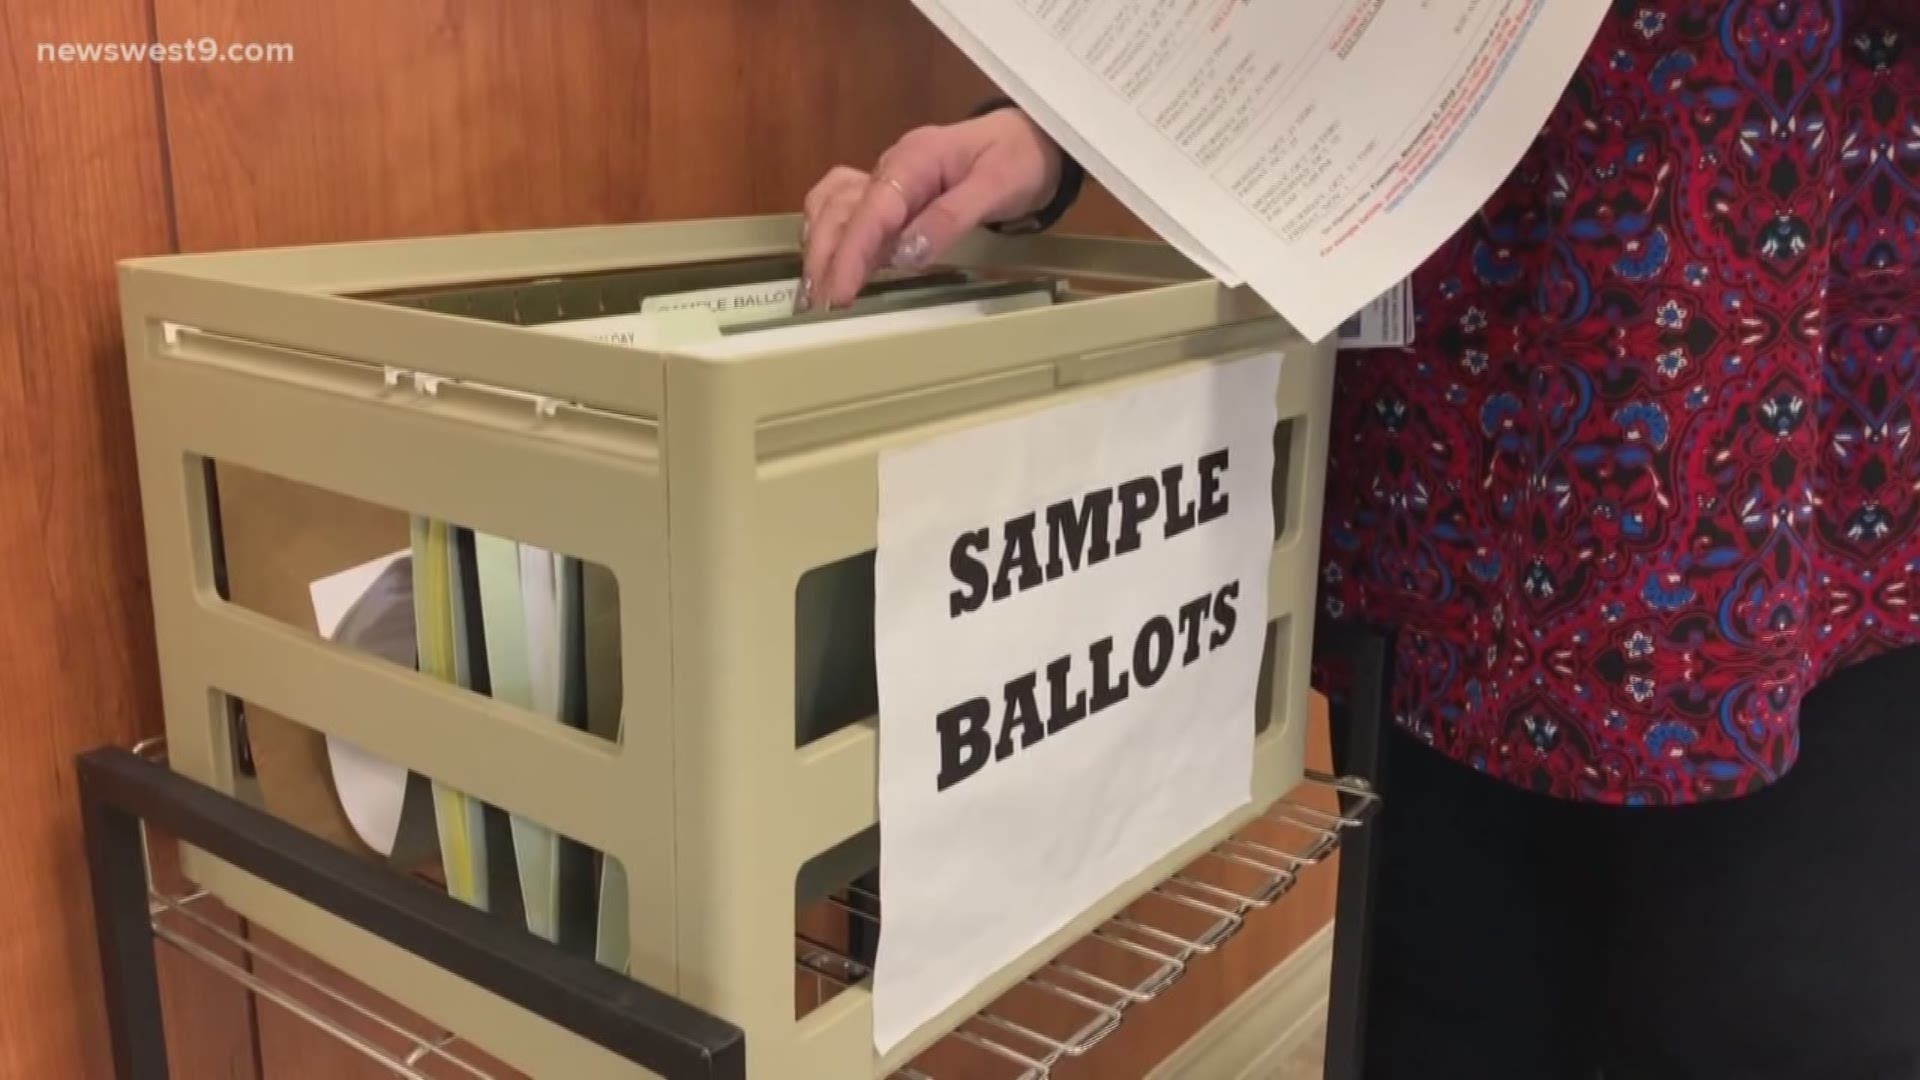 Judge rules ballot boxes in MISD bond election to be opened, recounted